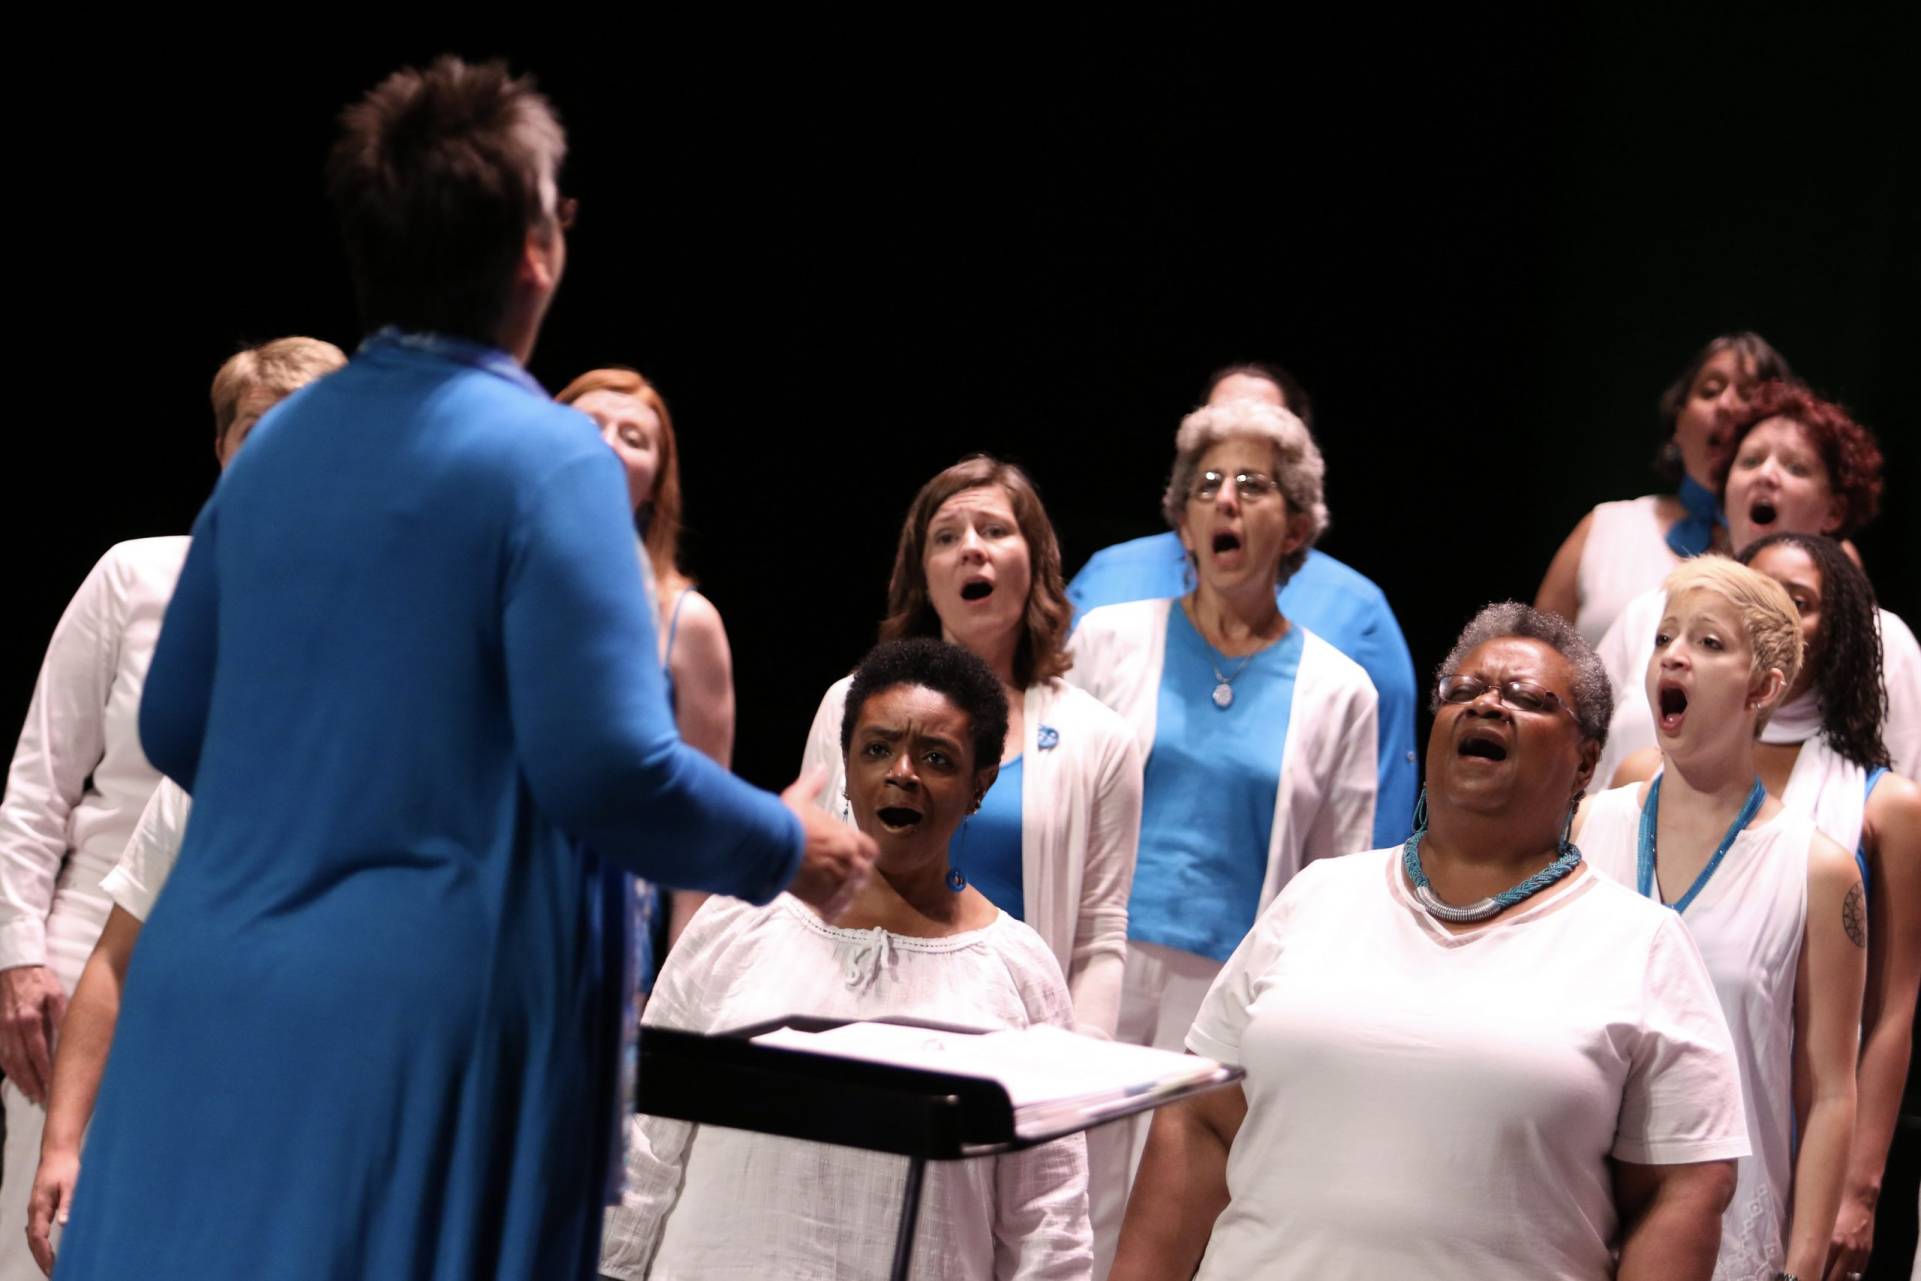 women singing with concentration and wide mouths